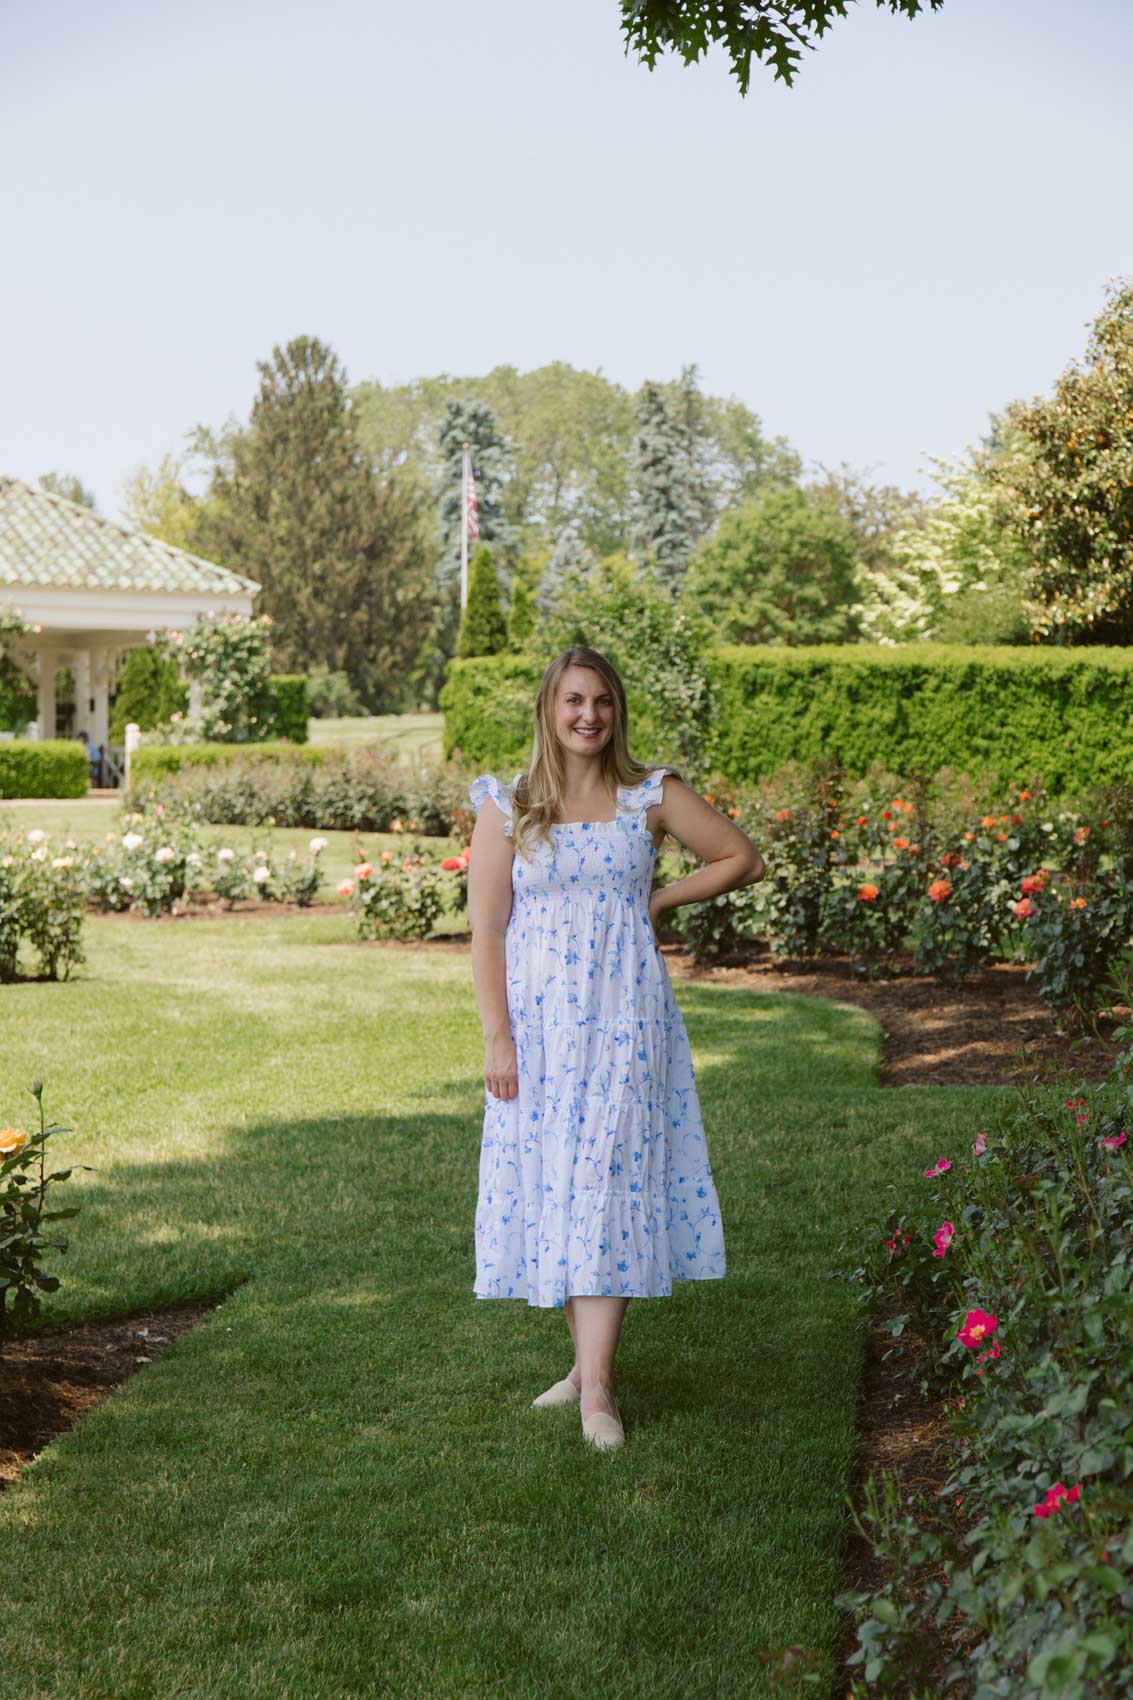 Hill House Nap Dress Review - Allyn Lewis